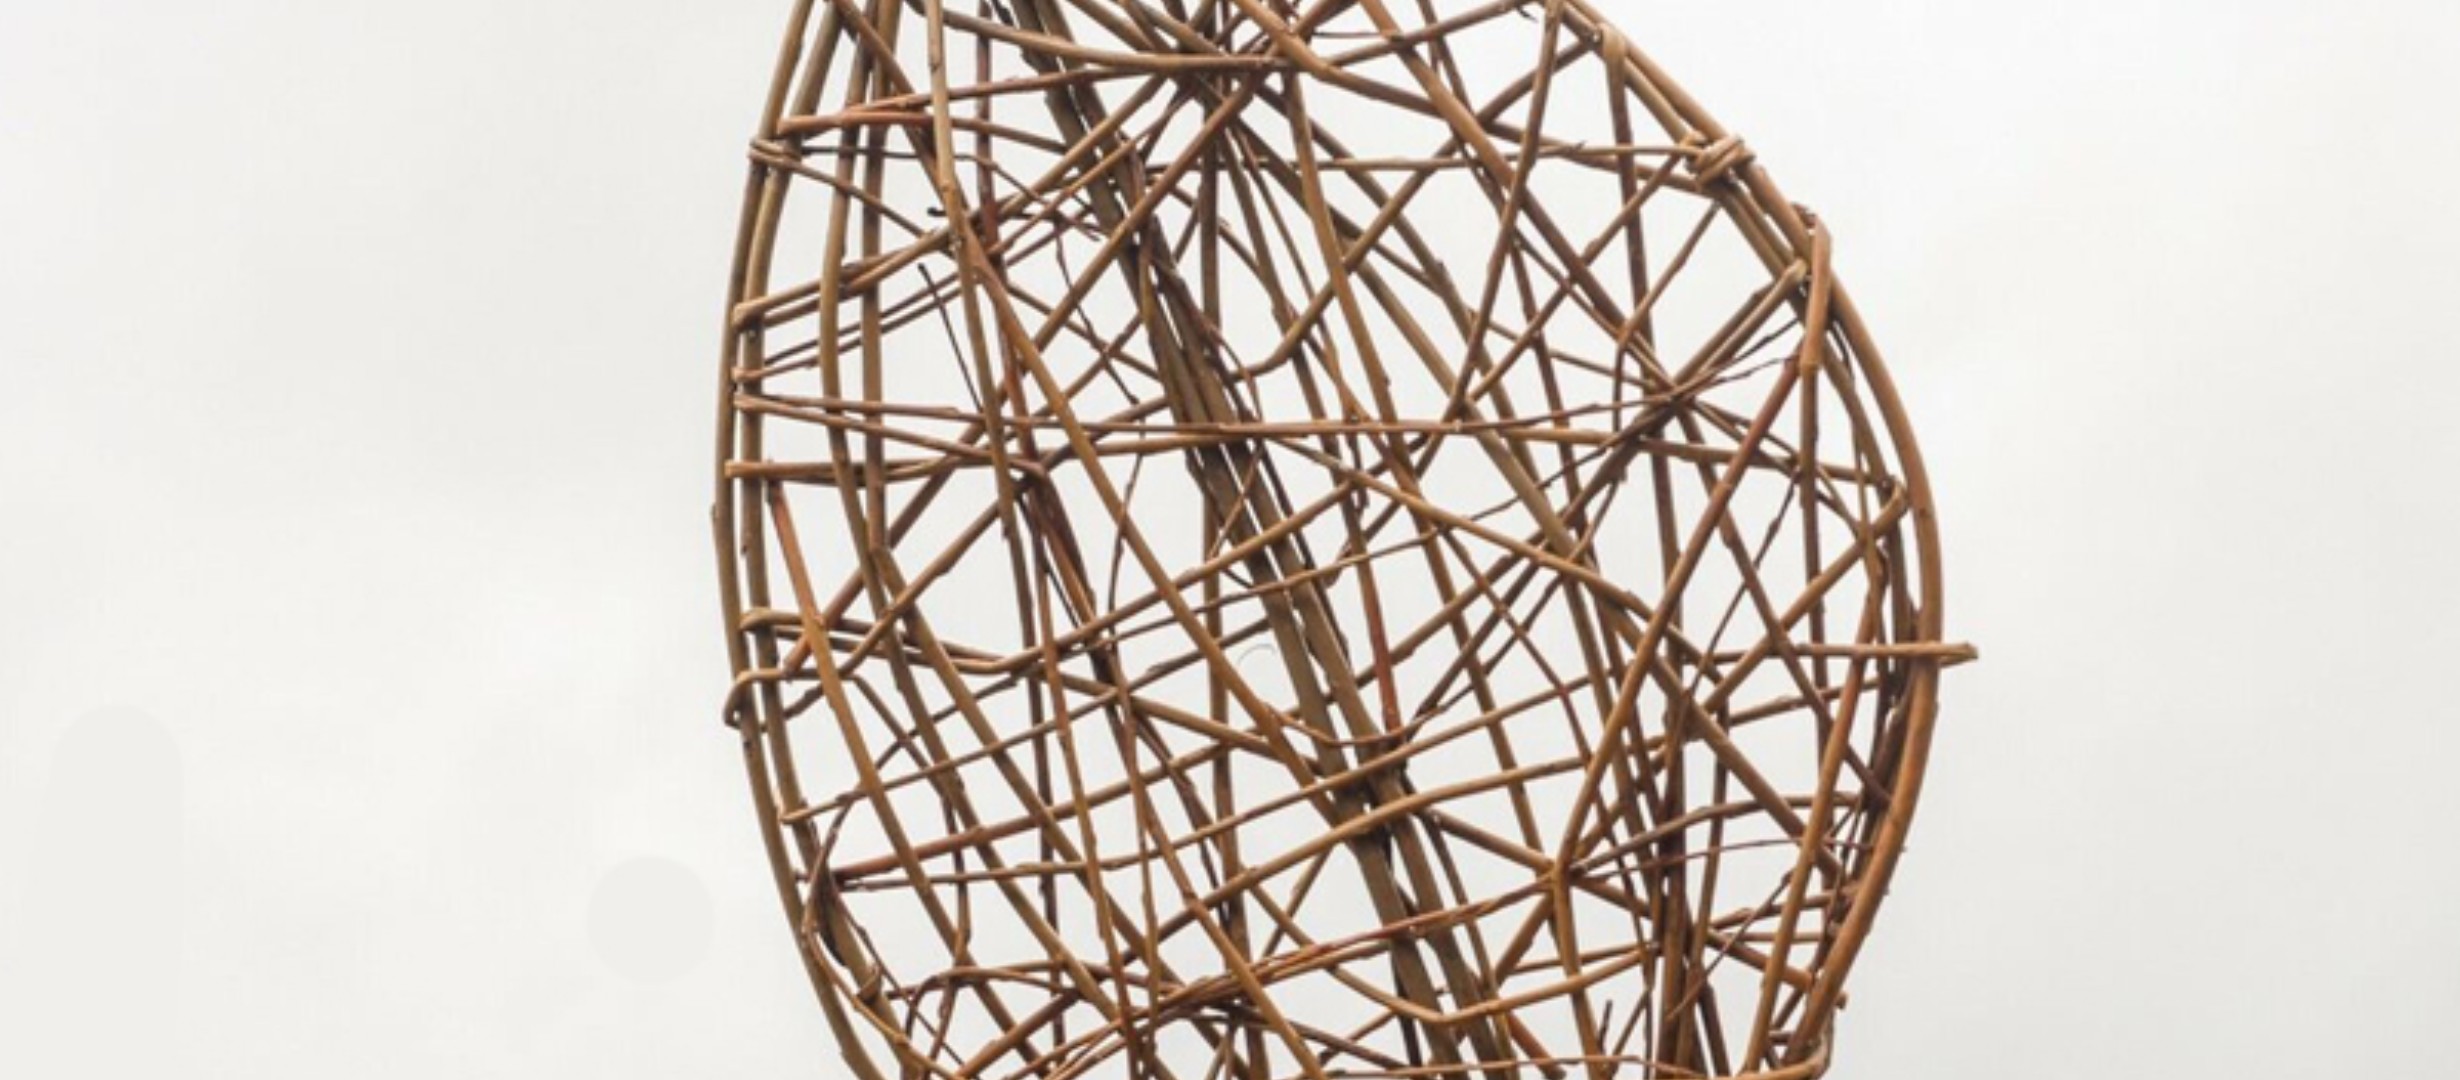 Photo of a geometric willow sculpture